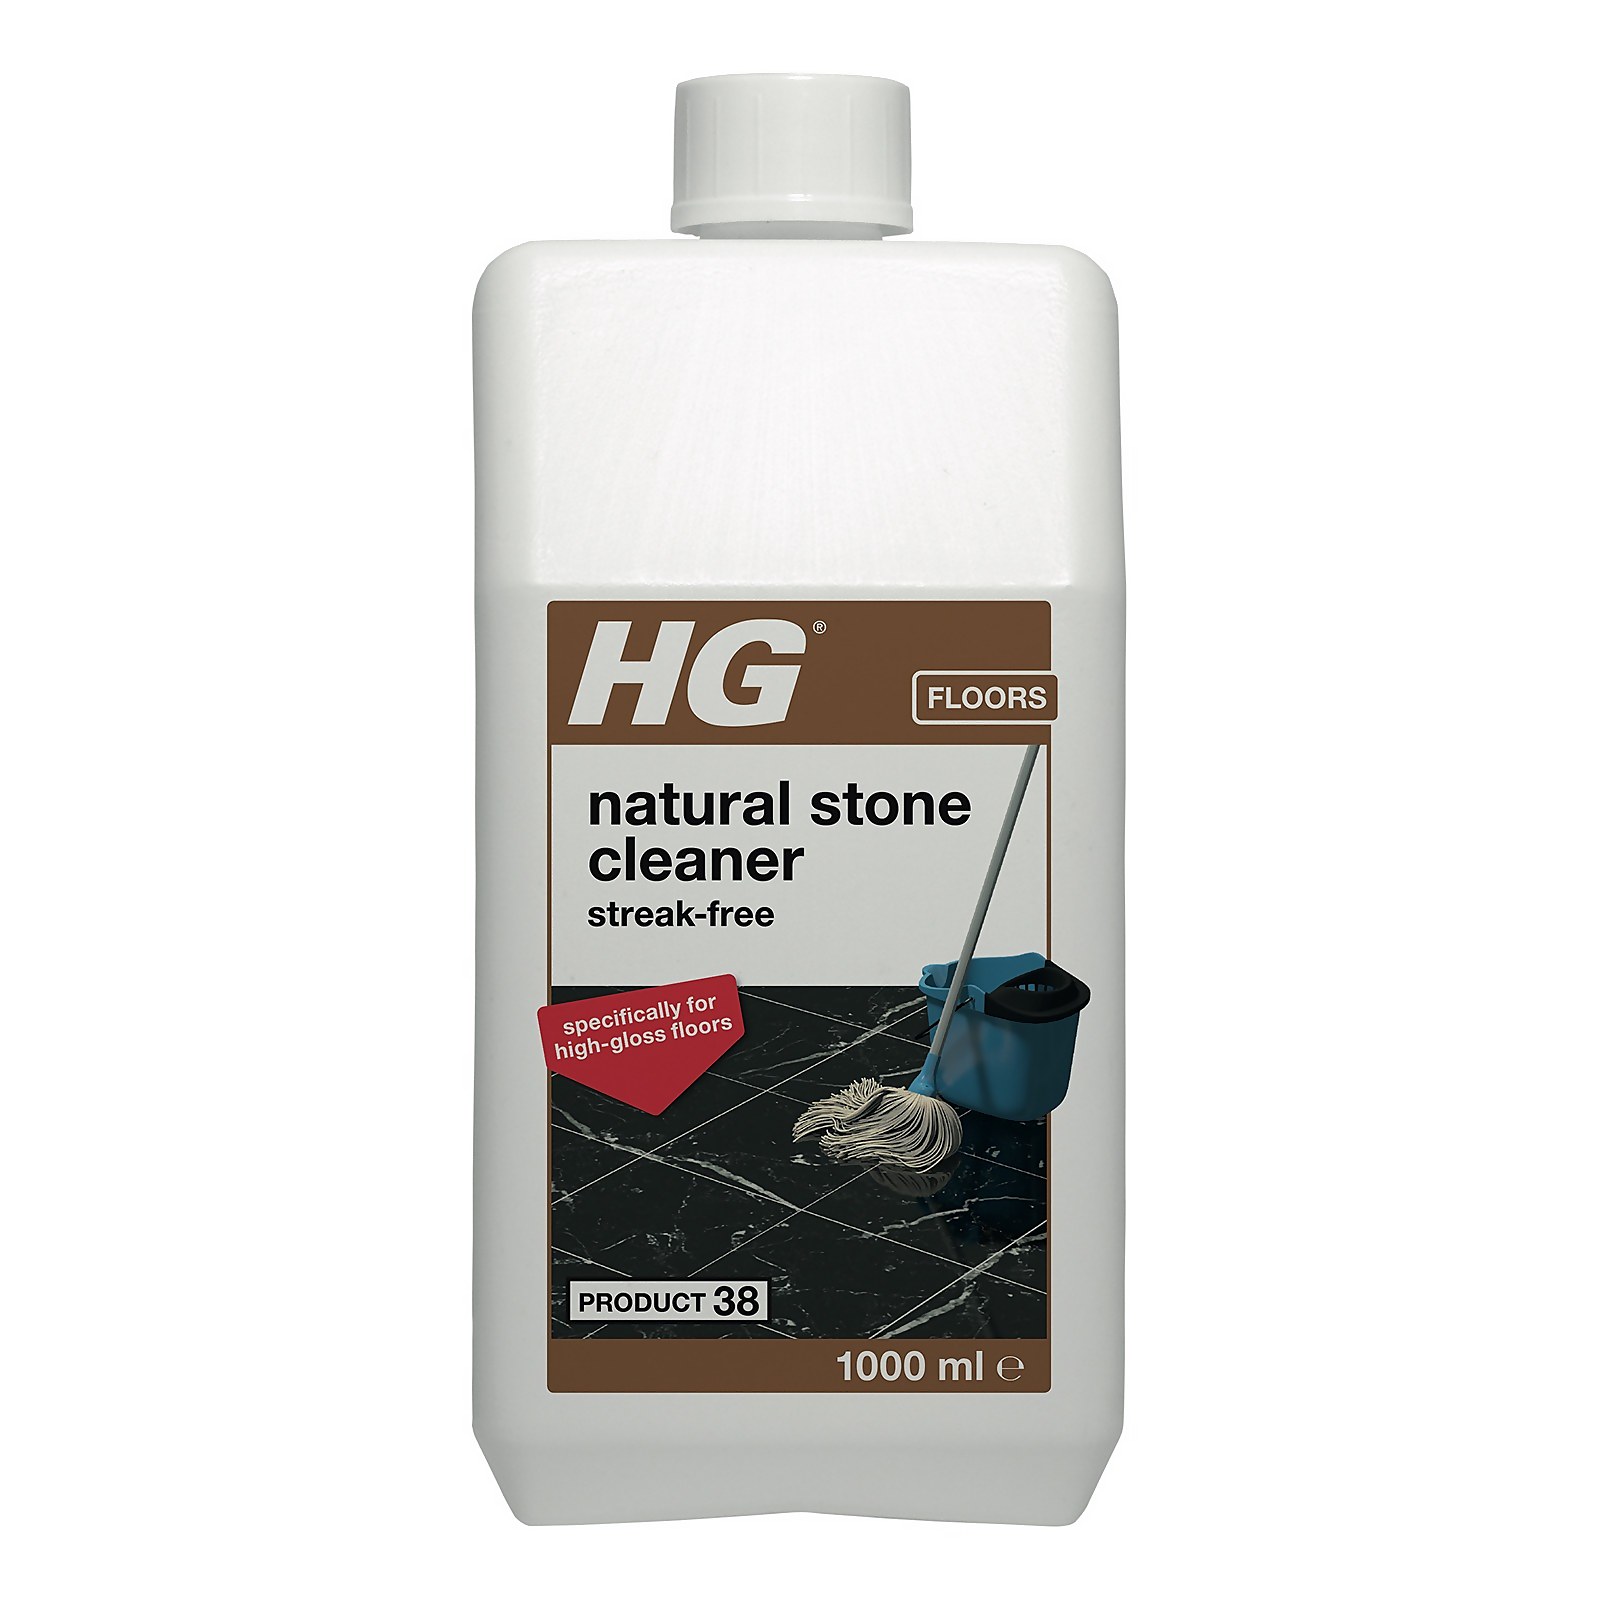 Photo of Hg Natural Stone Polished Tile Cleaner -product 38- 1l